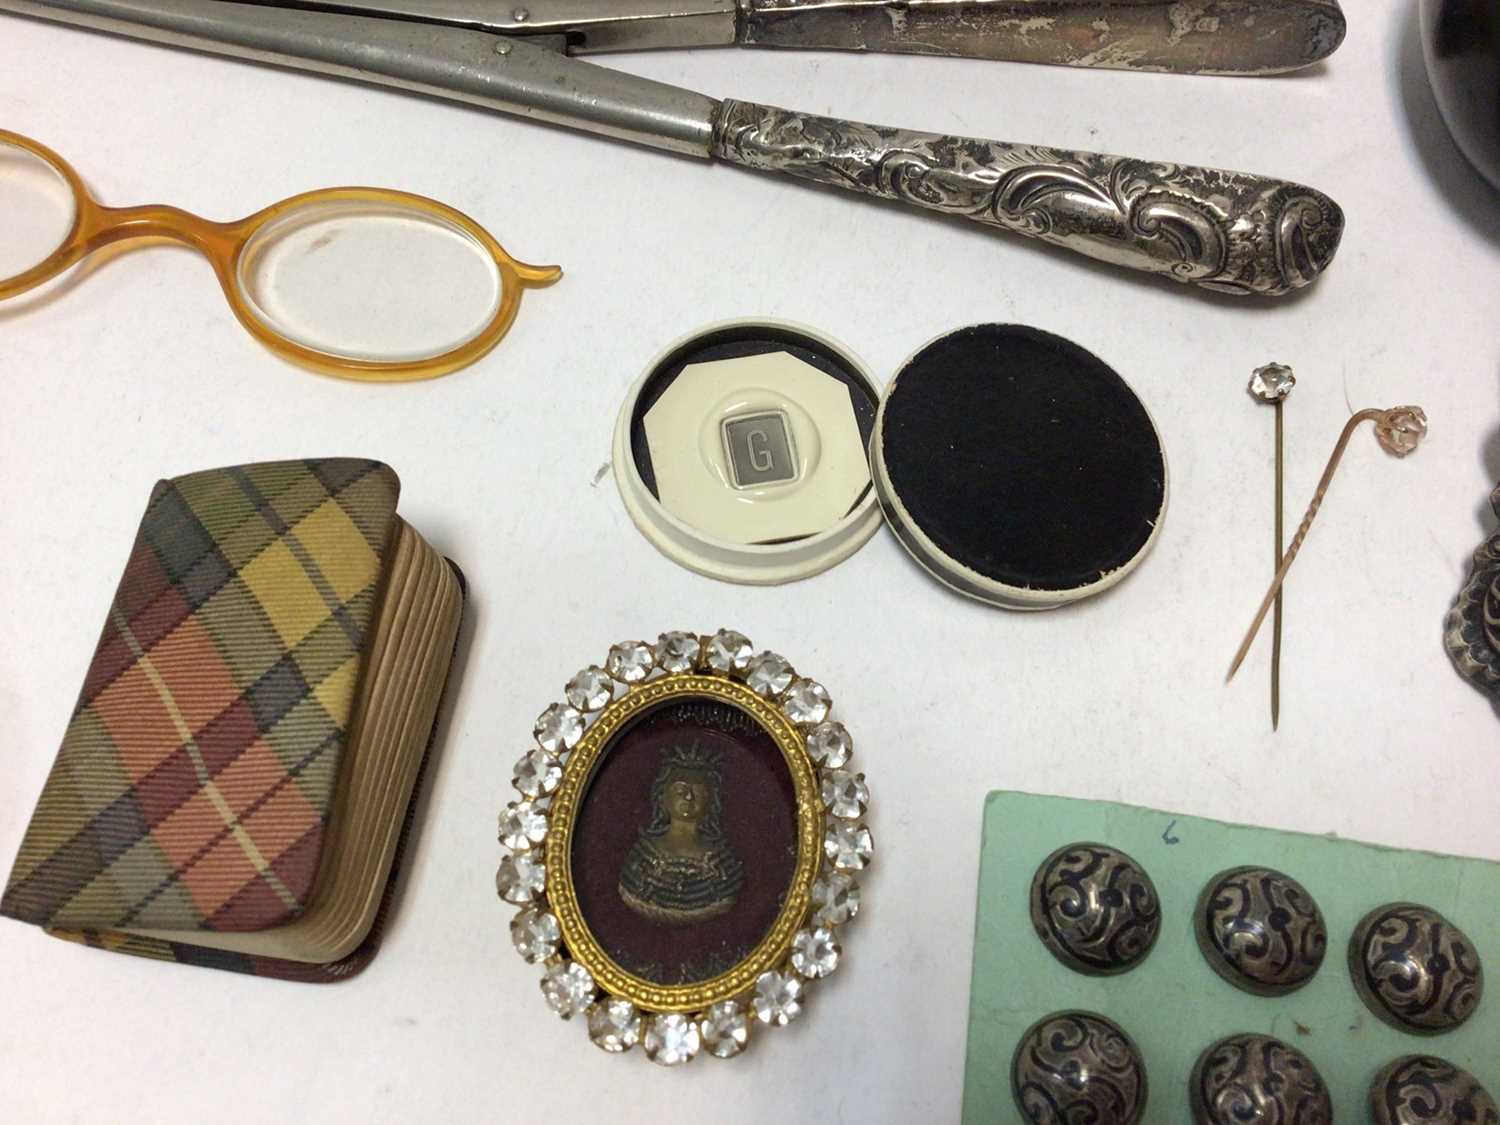 19th century paste buckles, silhouettes, book slide and sundries - Image 5 of 8